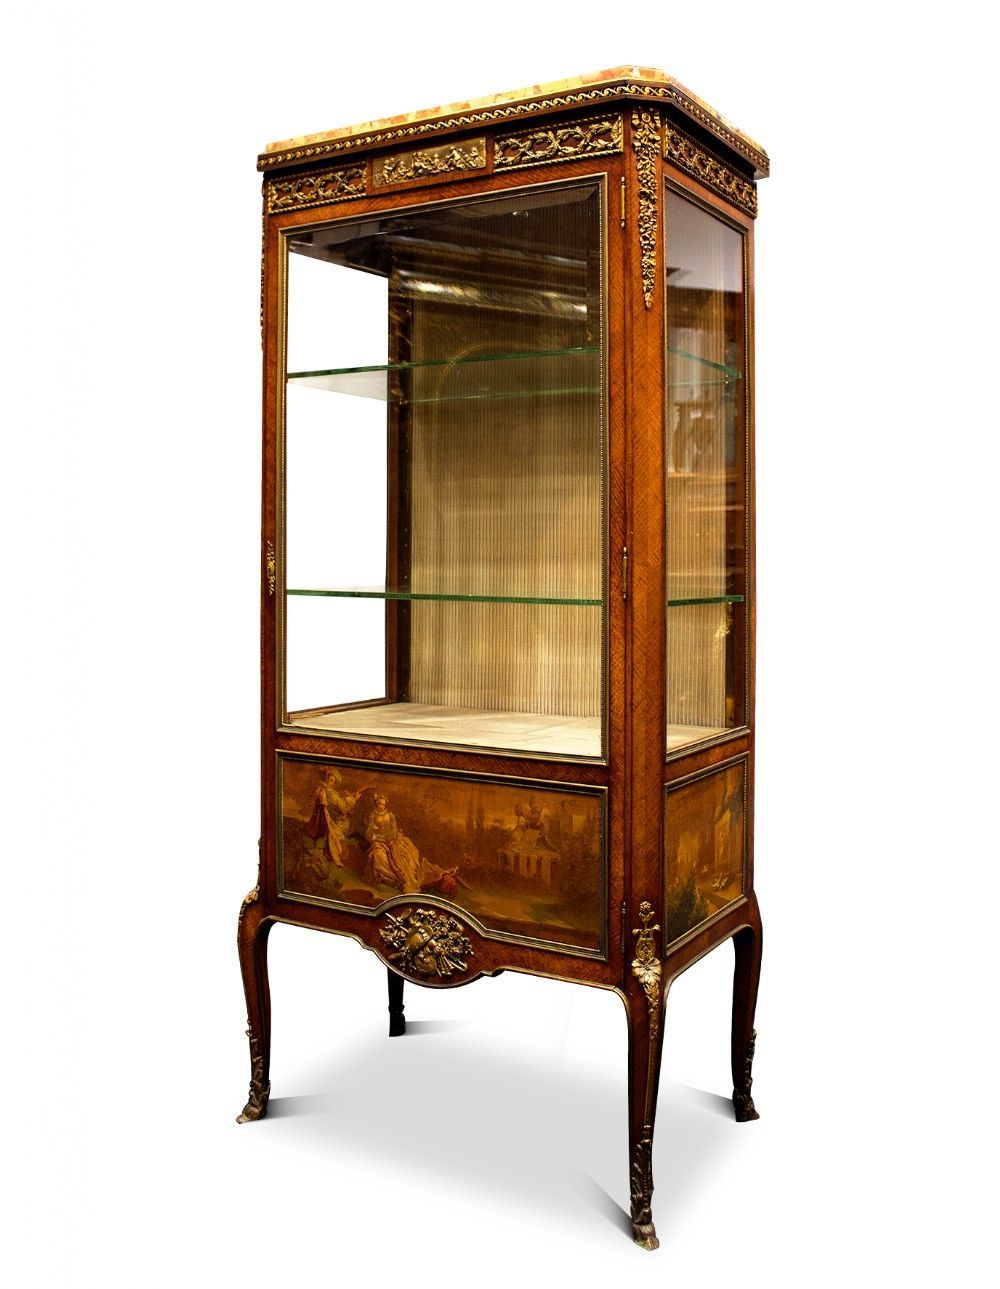 Exquisite French Vernis Martin Vitrine display Cabinet By Francois Linke